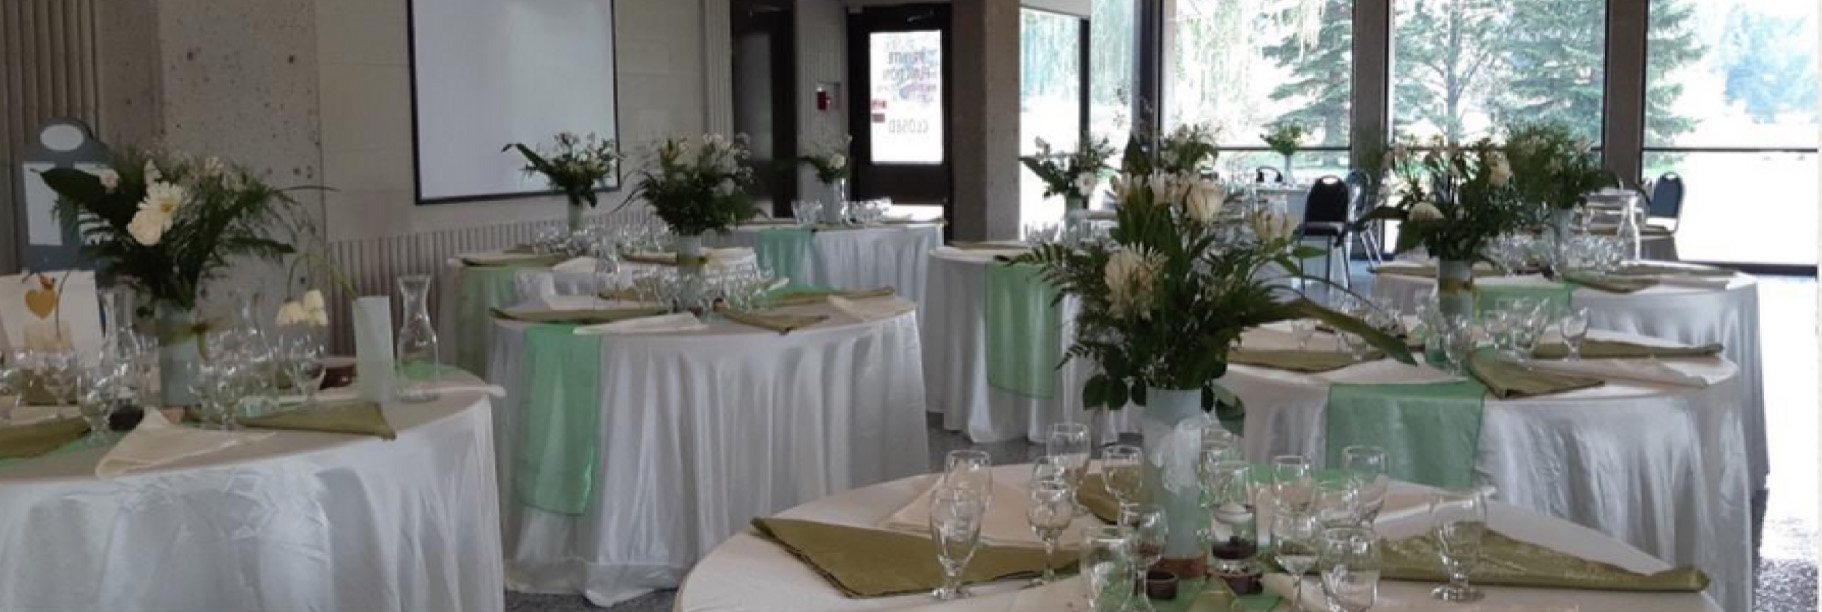 Tables decorated for a special event